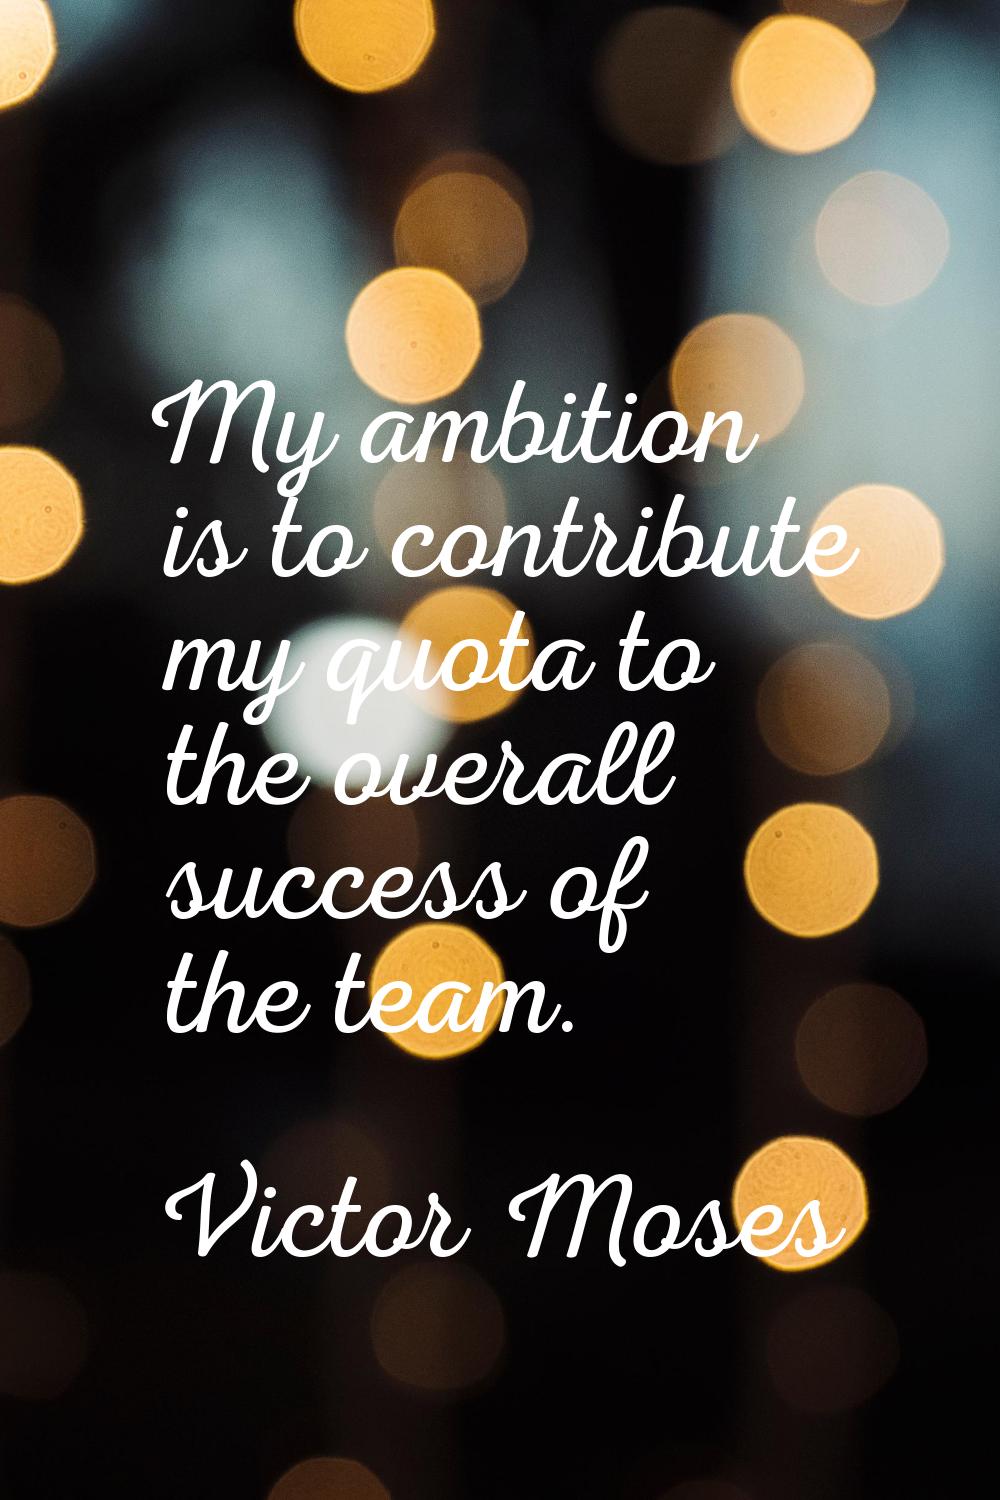 My ambition is to contribute my quota to the overall success of the team.